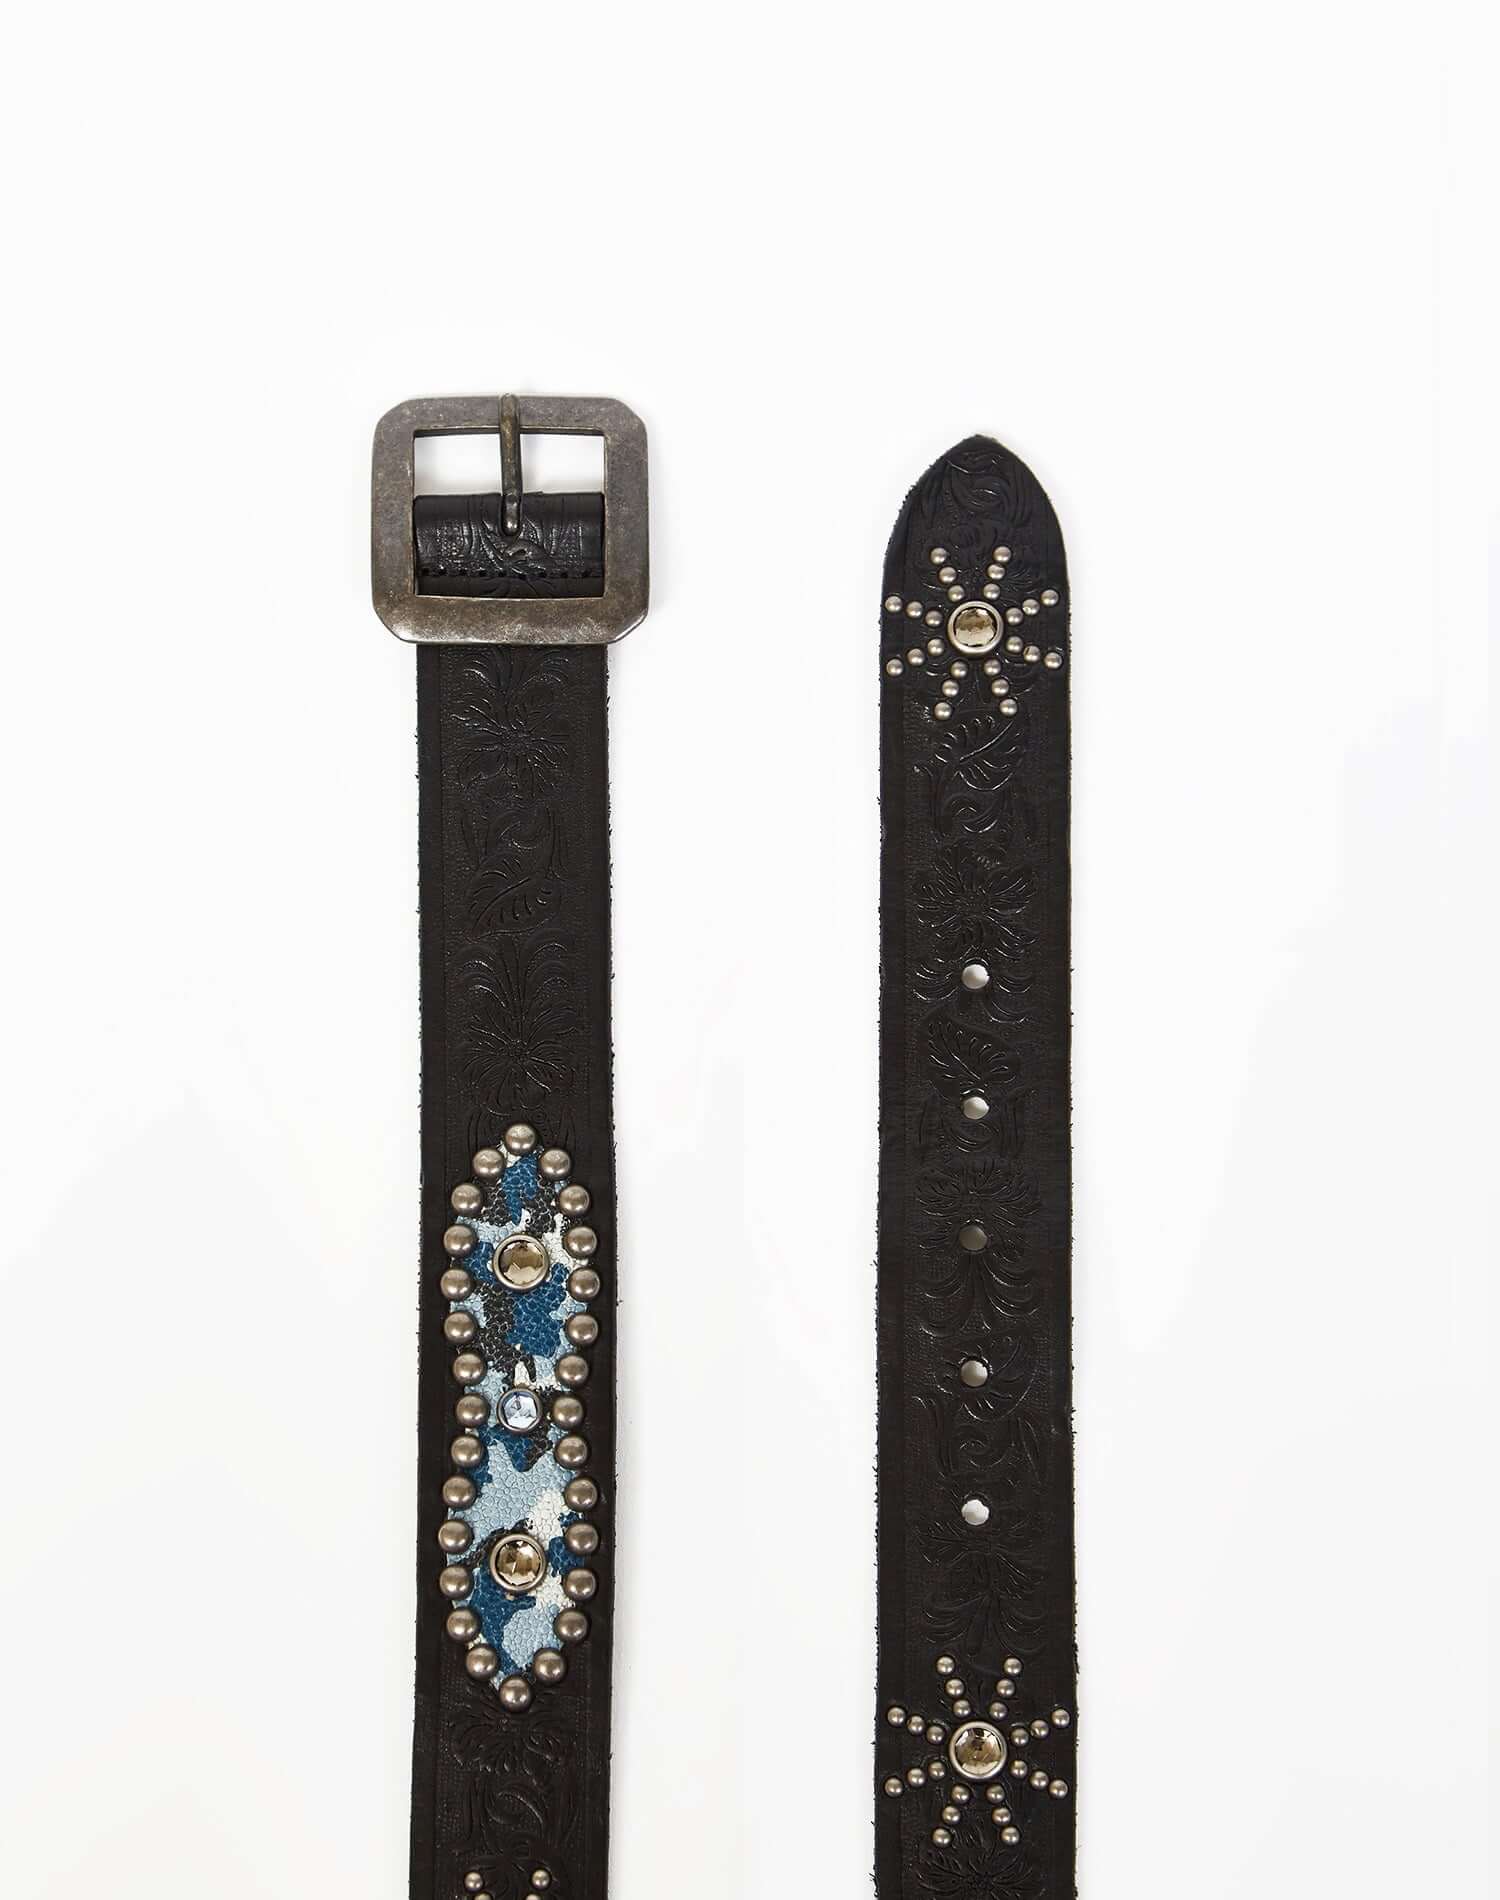 ARMY BELT Black leather belt with carved details. Studded inserts with camo print and rhinestones. Squared zamac buckle. Height: 3,5 cm. Made in Italy. HTC LOS ANGELES